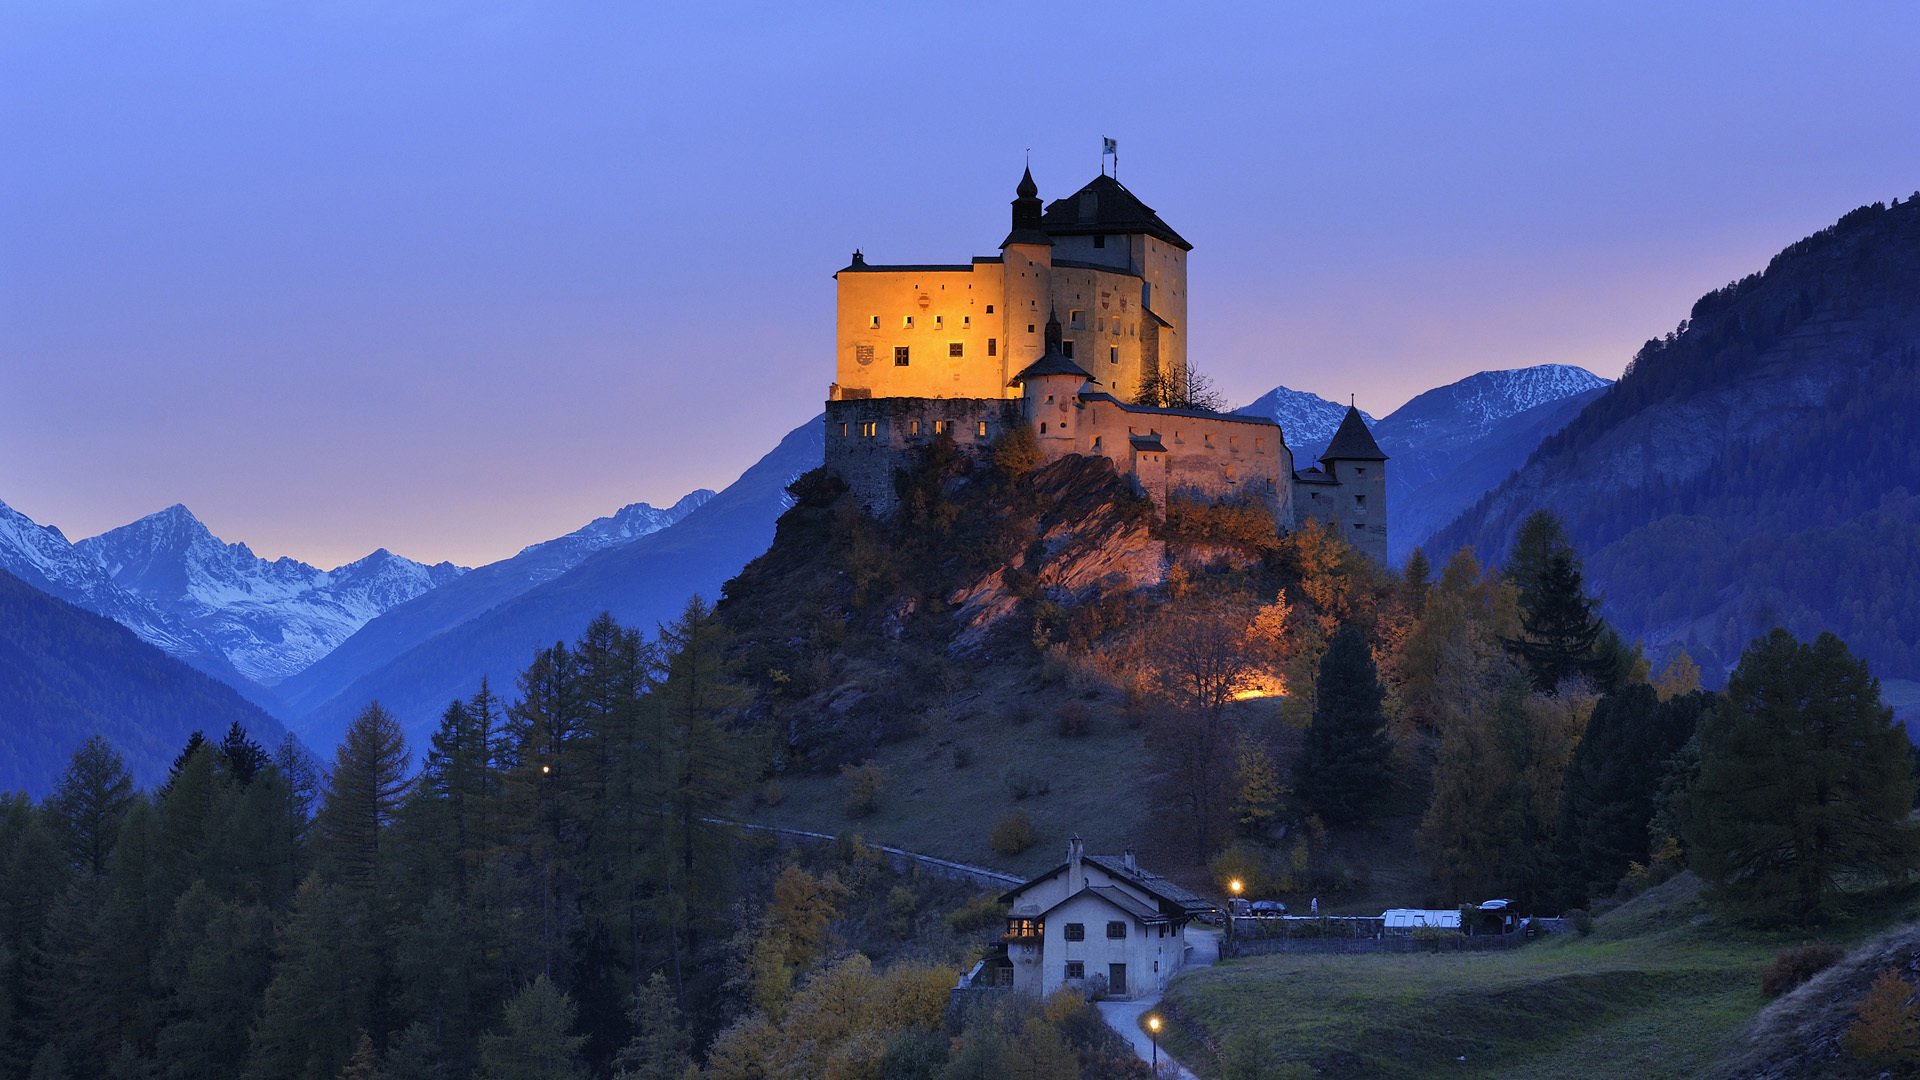 Evening castle on the hill of the mountain